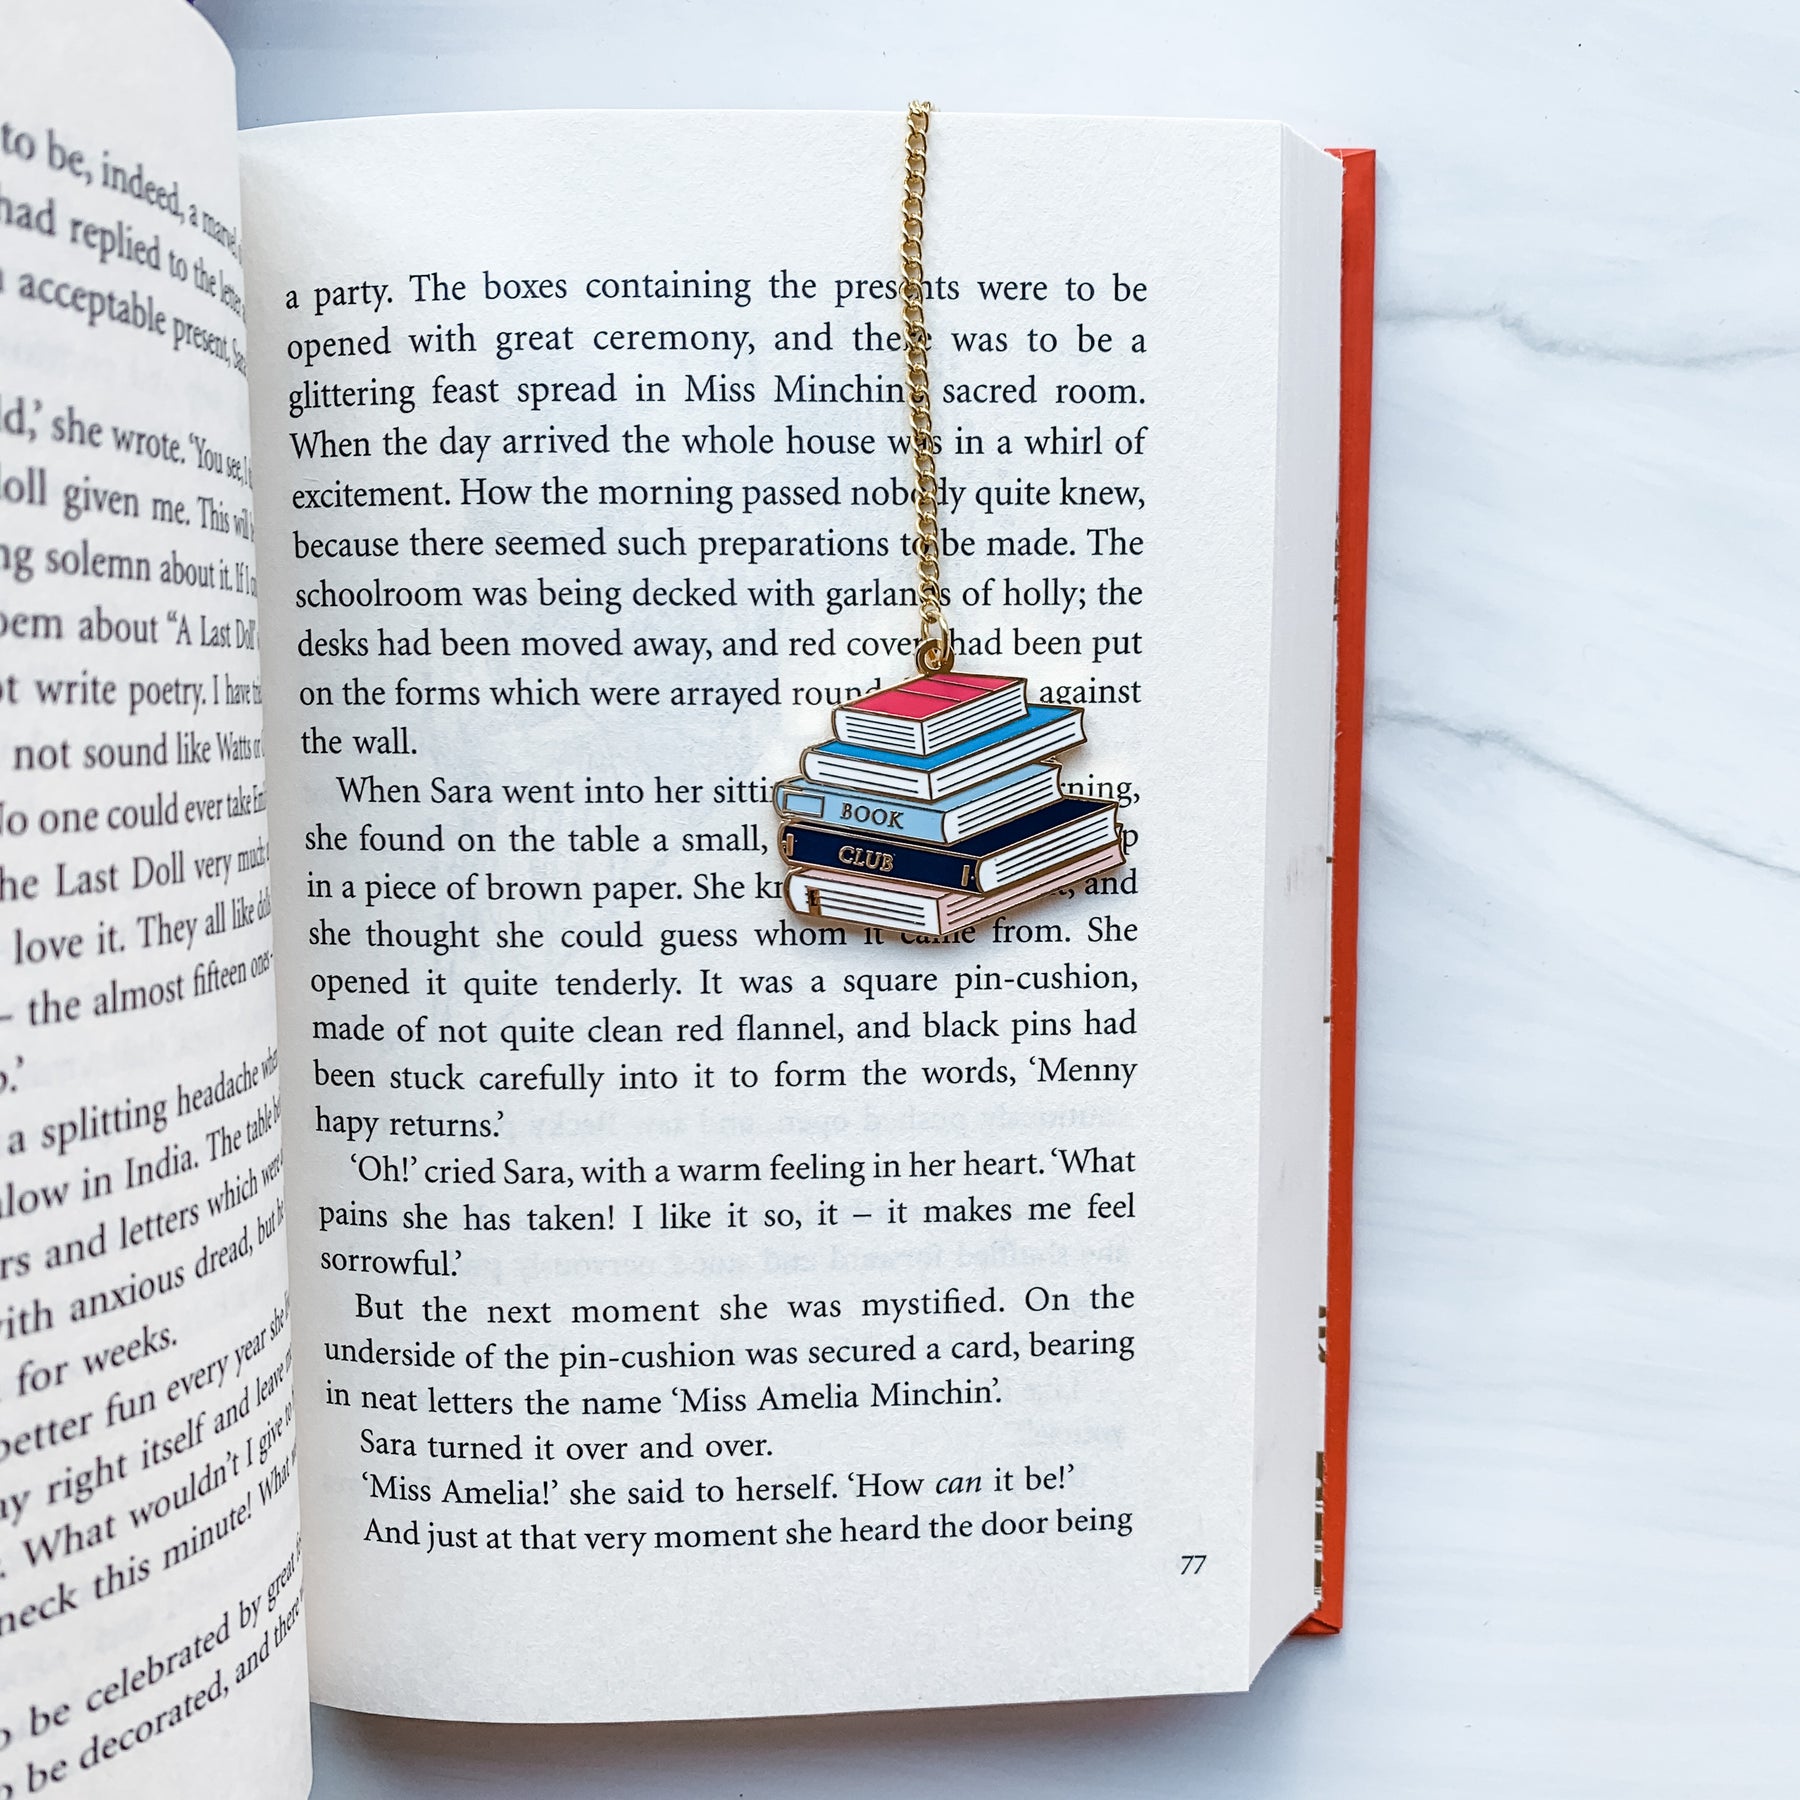 Pin on Books and Bookmarks!